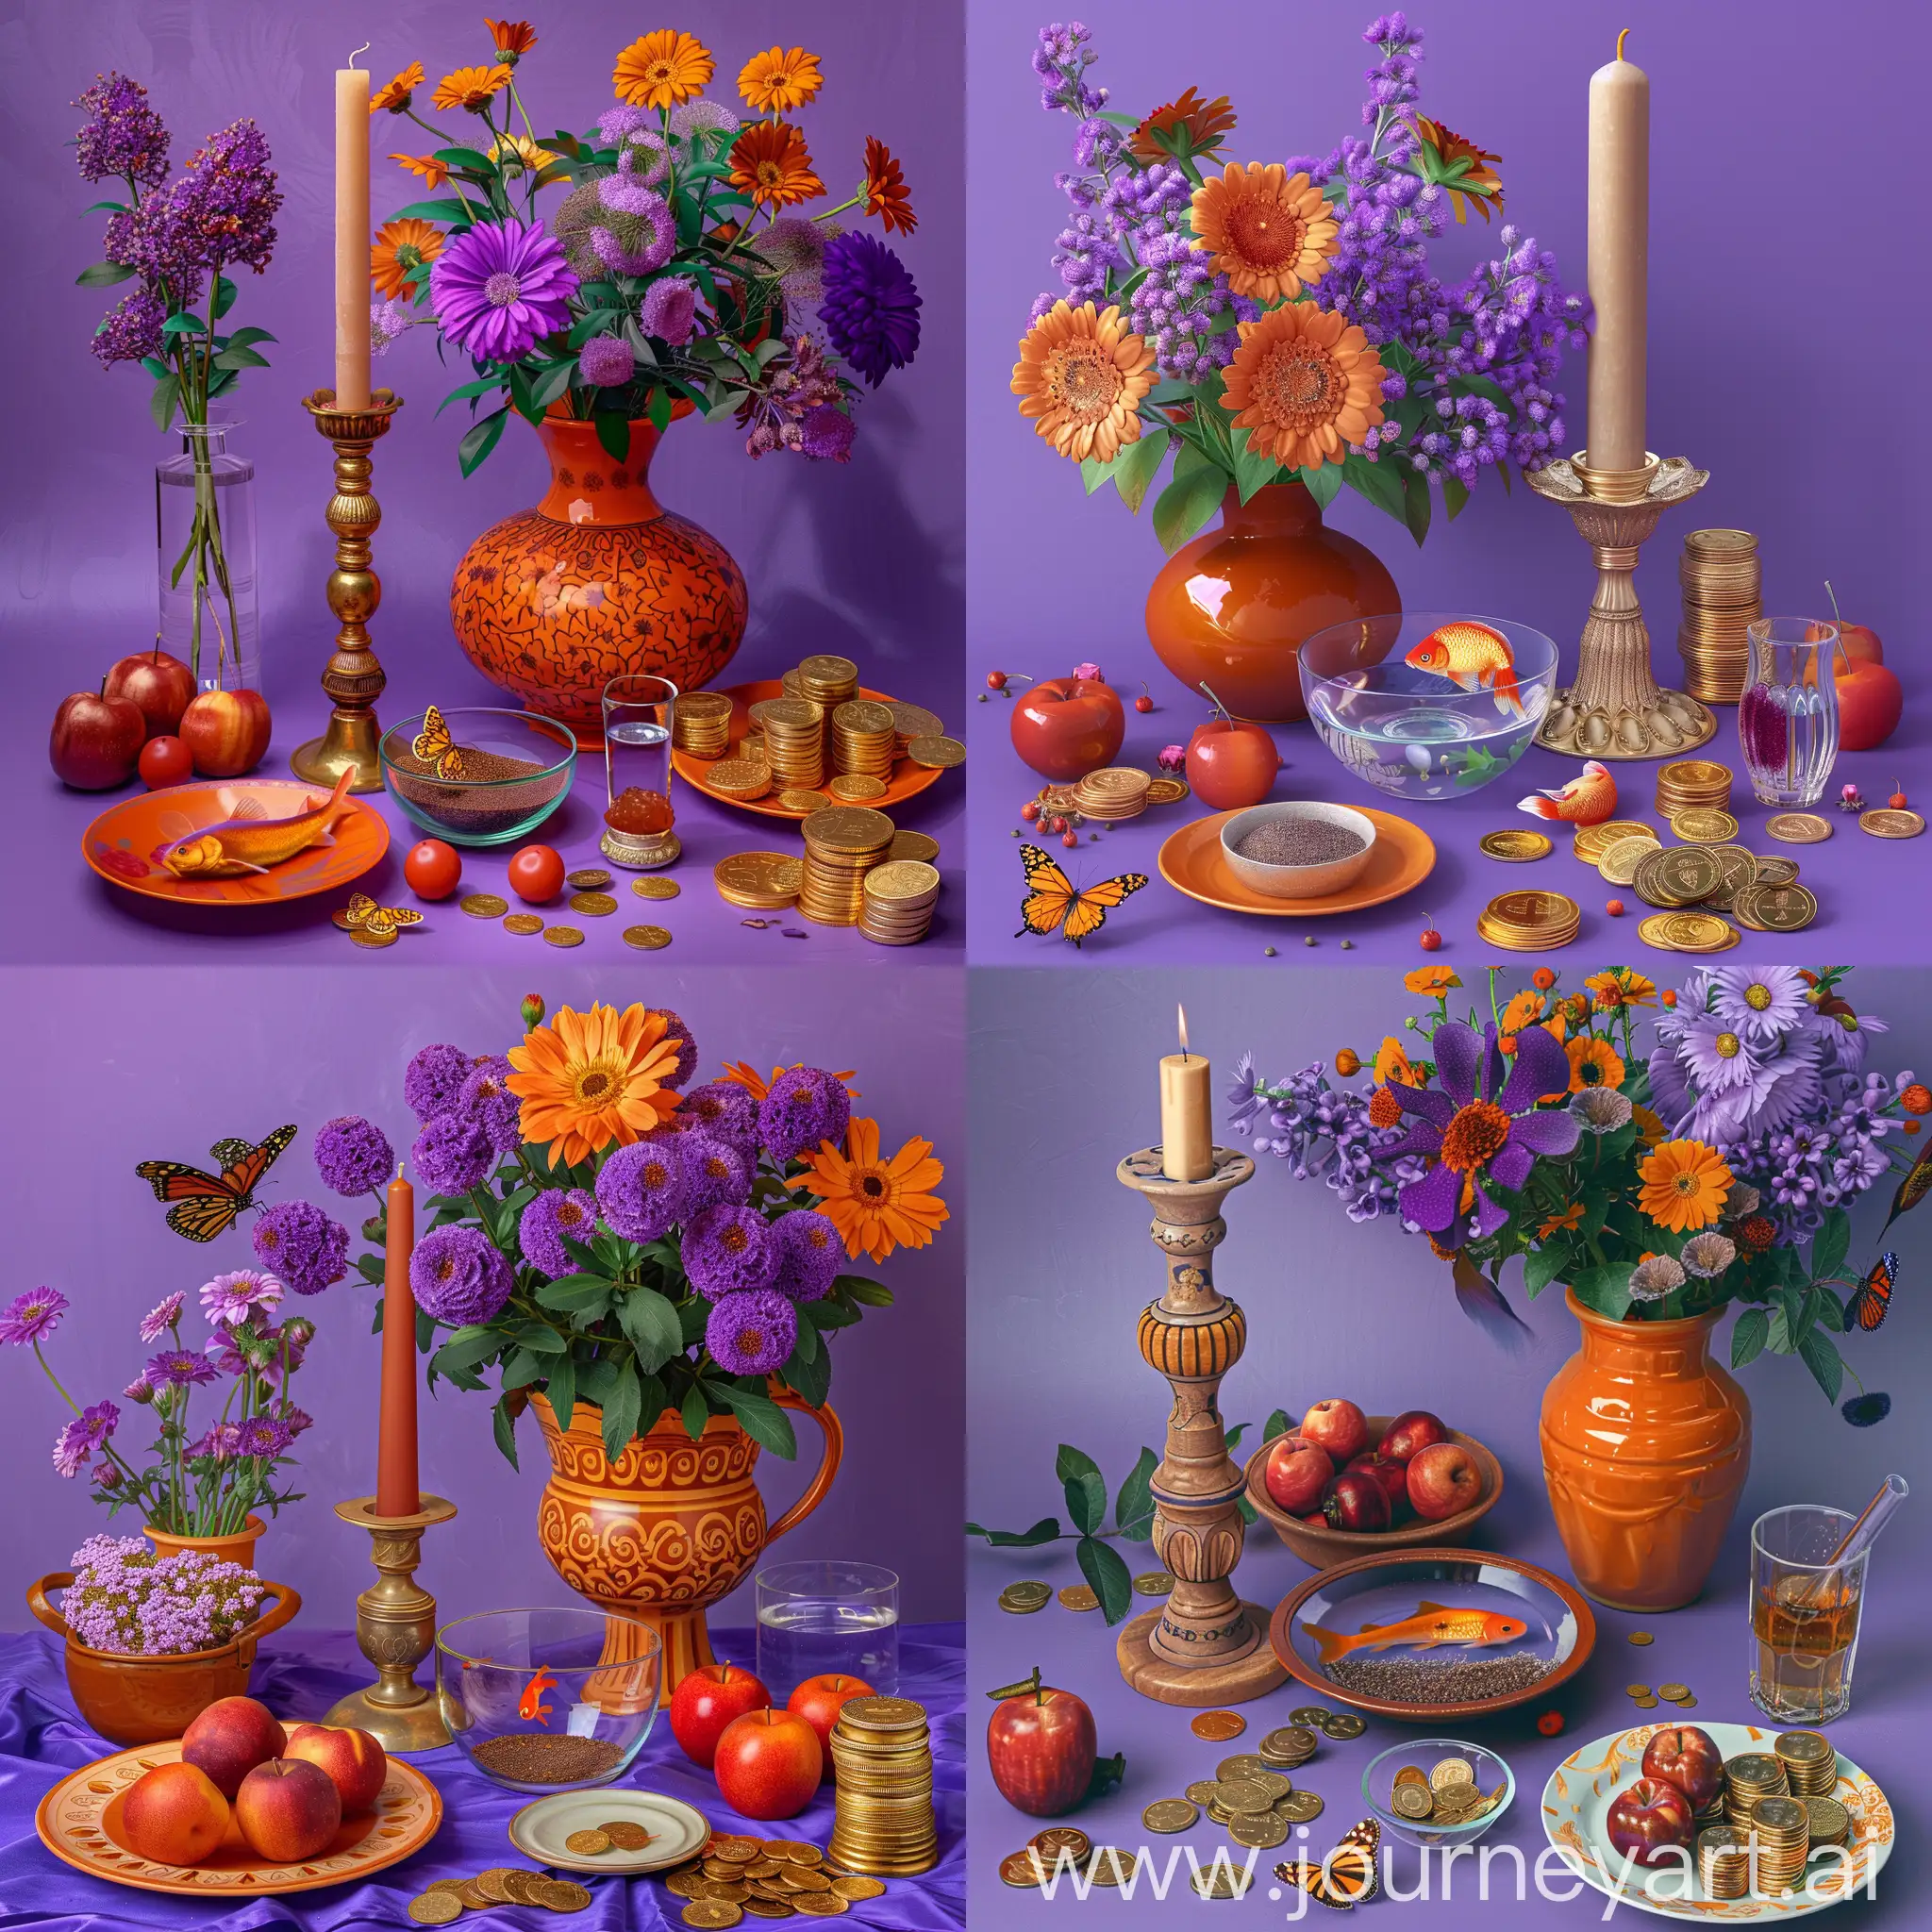 Purple-Iranian-Candlestick-with-Orange-Fish-and-Butterfly-Decor